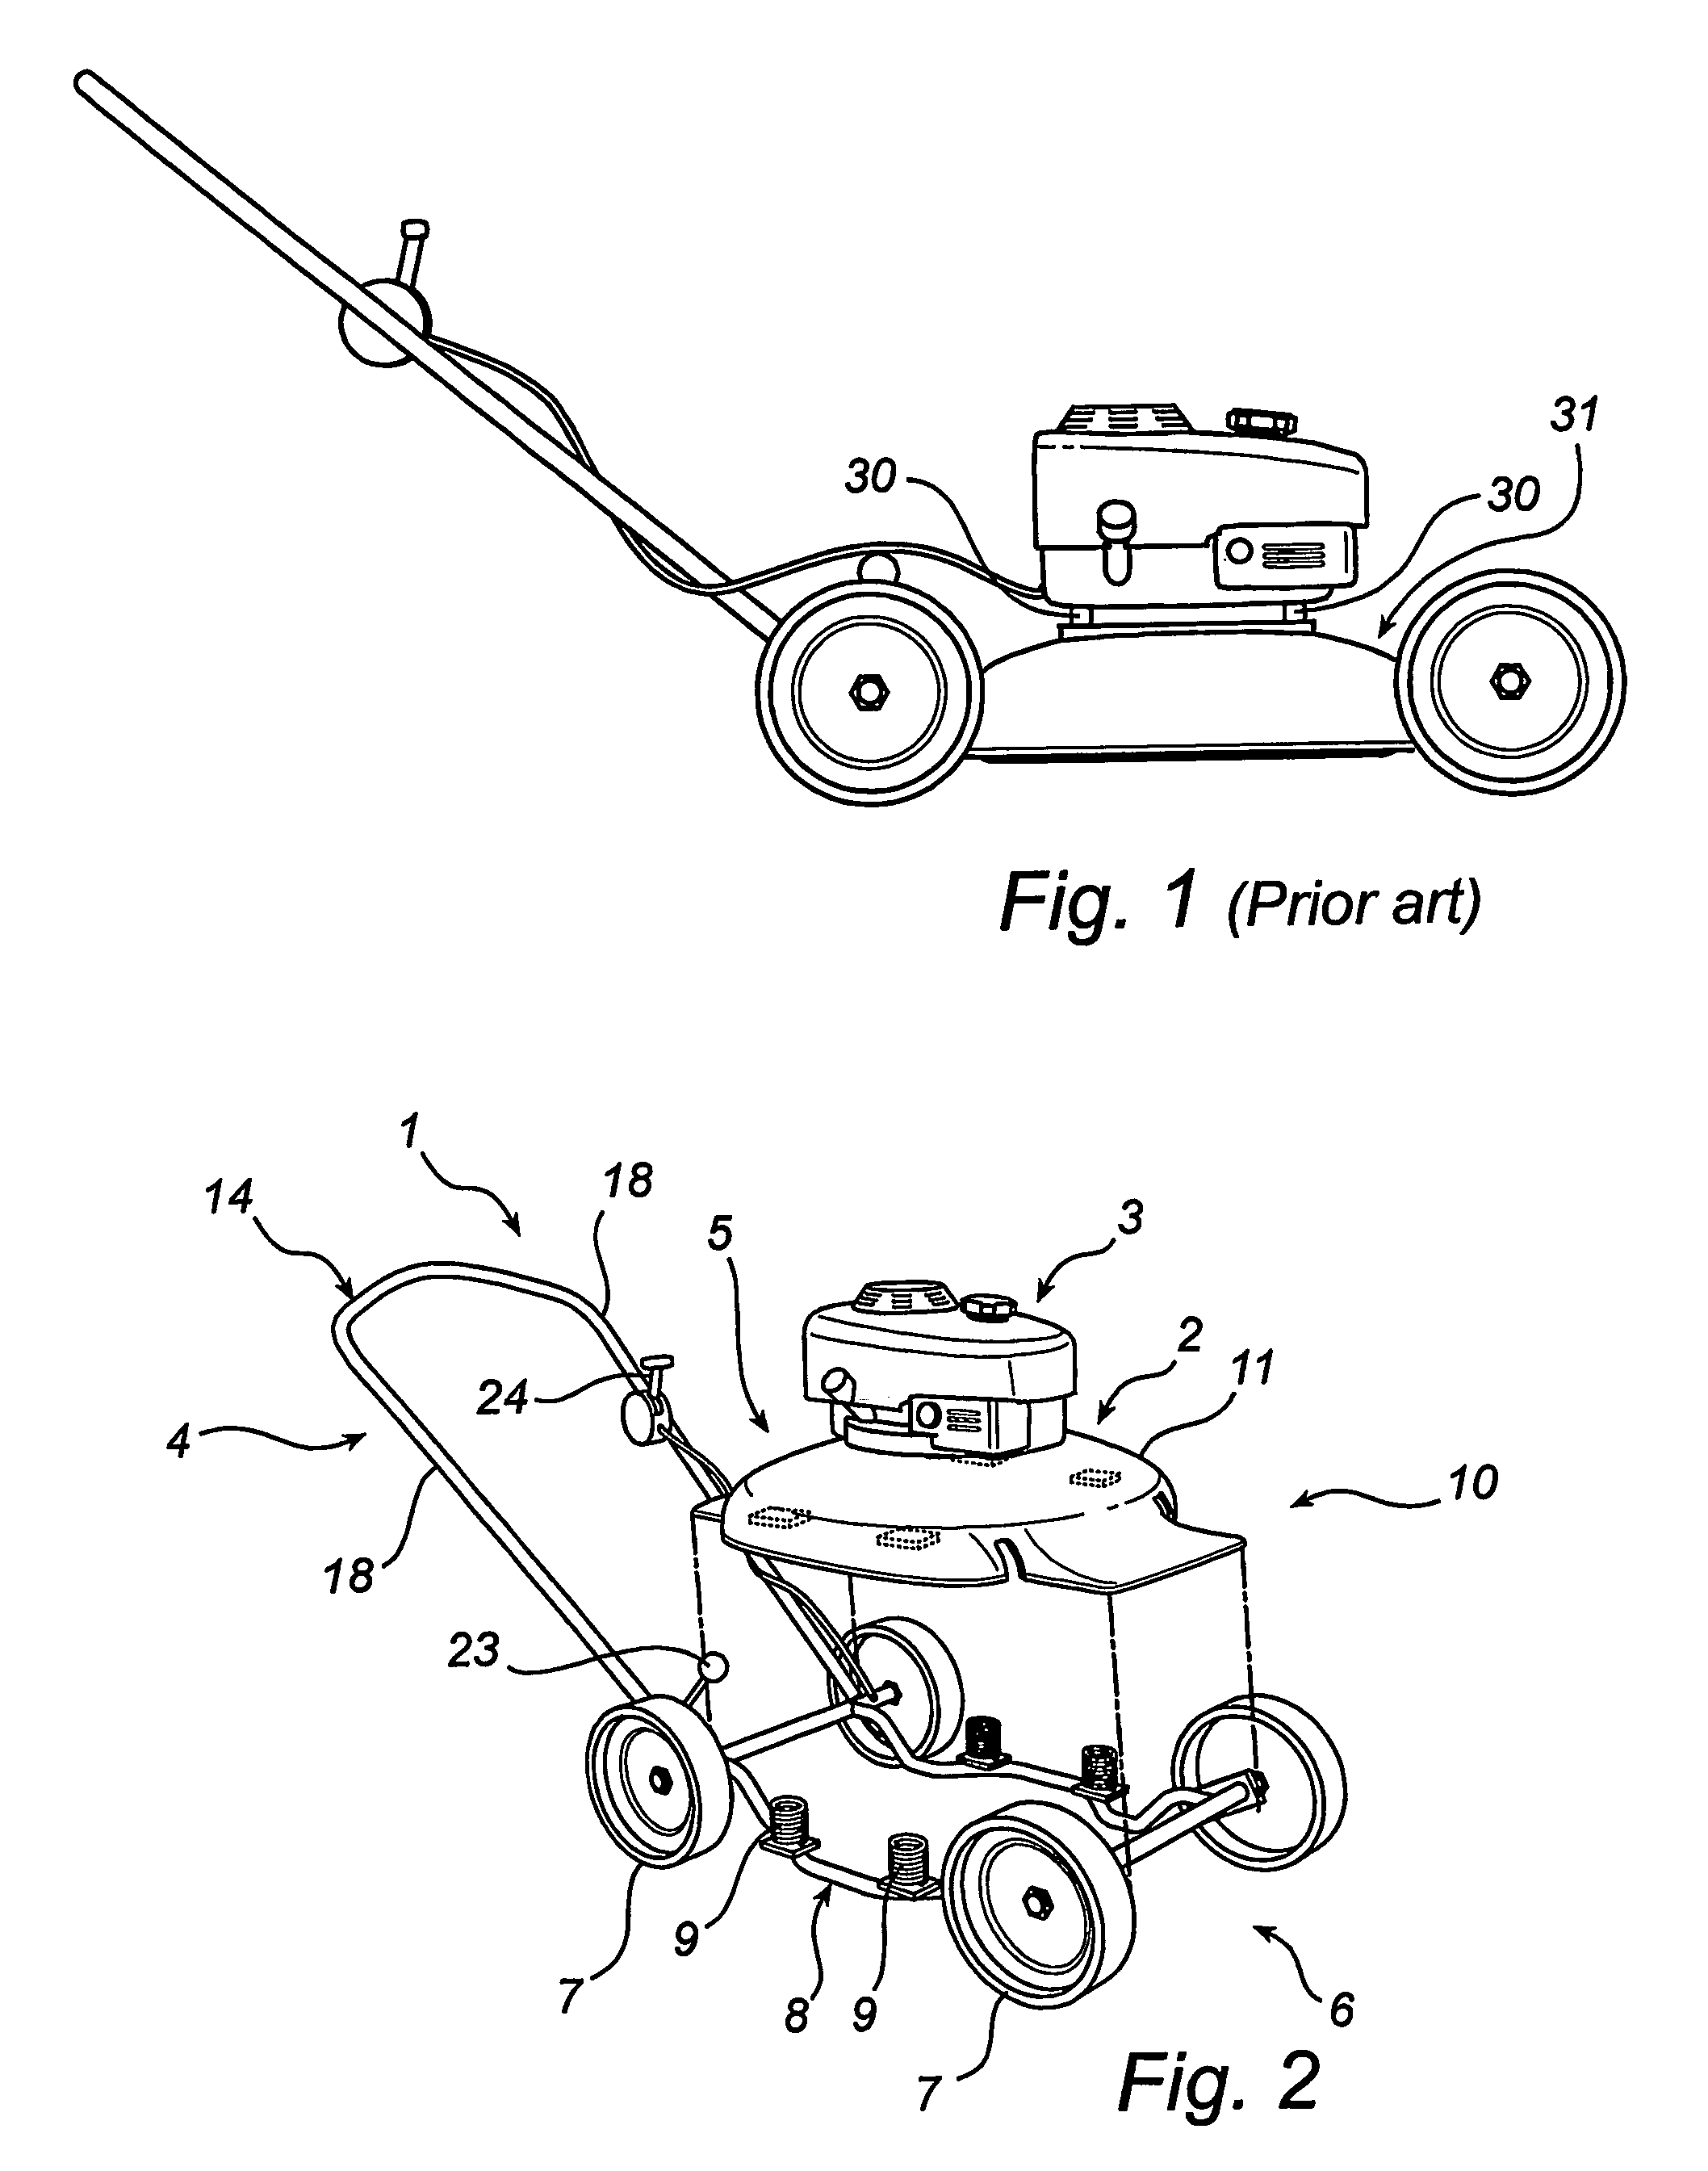 Lawnmower with vibration reduction